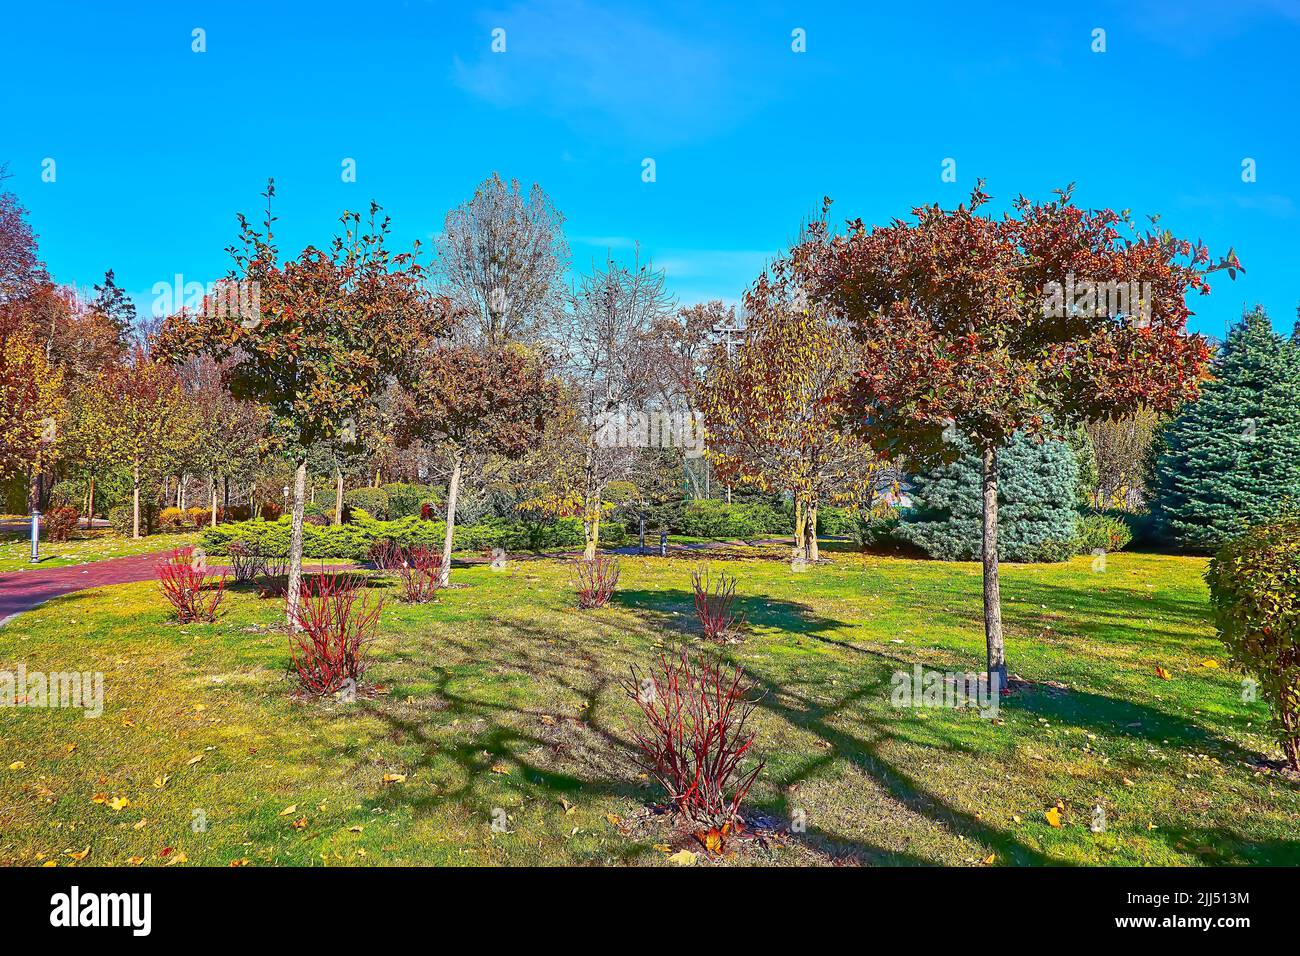 The autumn park with bright green lawn, whitebeam trees, juniper bushes and spruces in background, Mezhyhirya, Ukraine Stock Photo